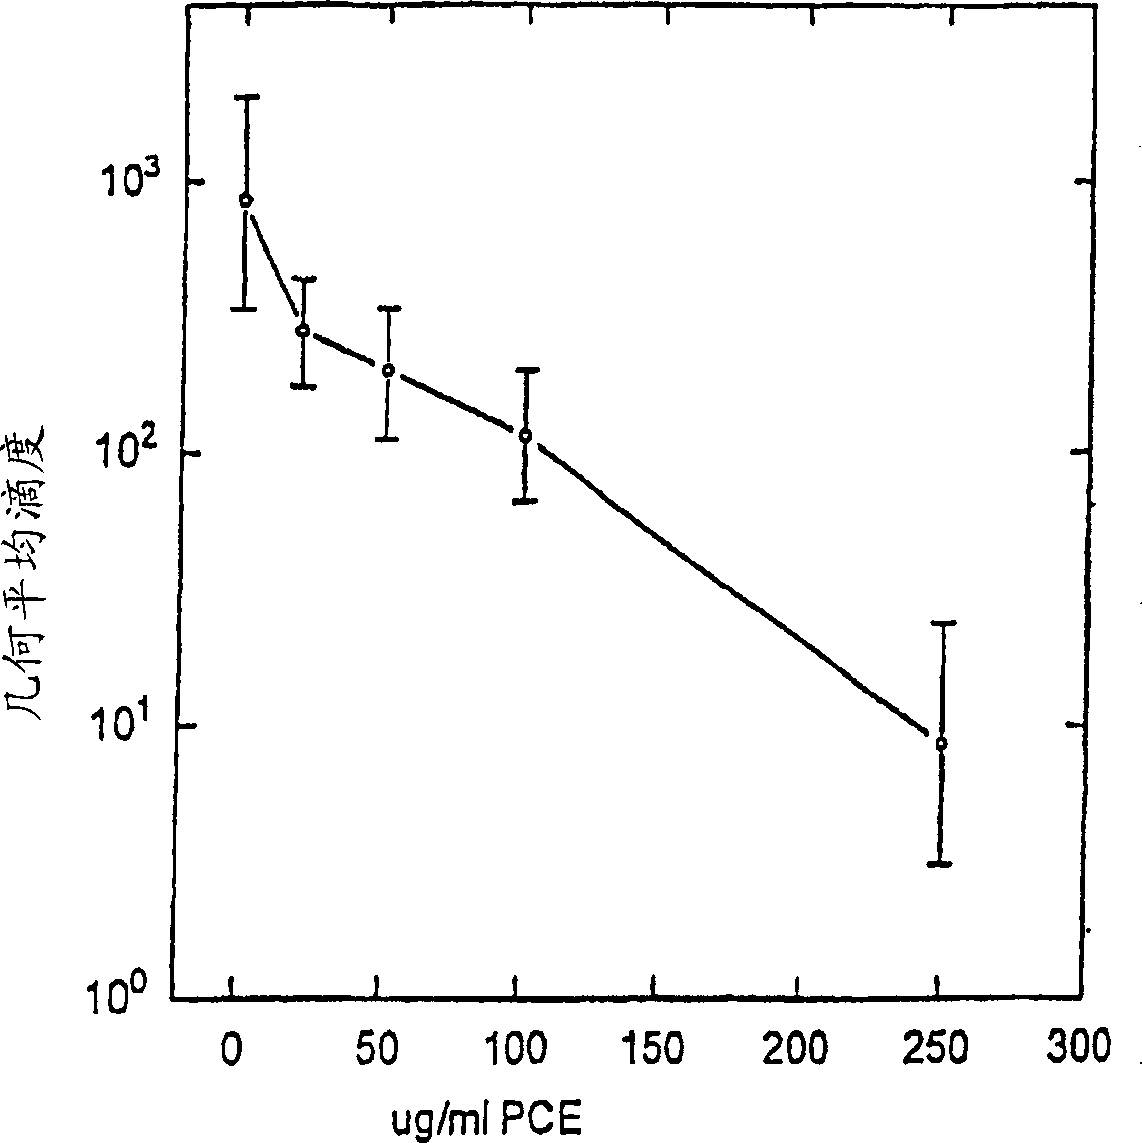 Anti-hsv agent for inhibiting replication of HSV-1 and HSV-2 and method of producing a substance having anti-HSV activity